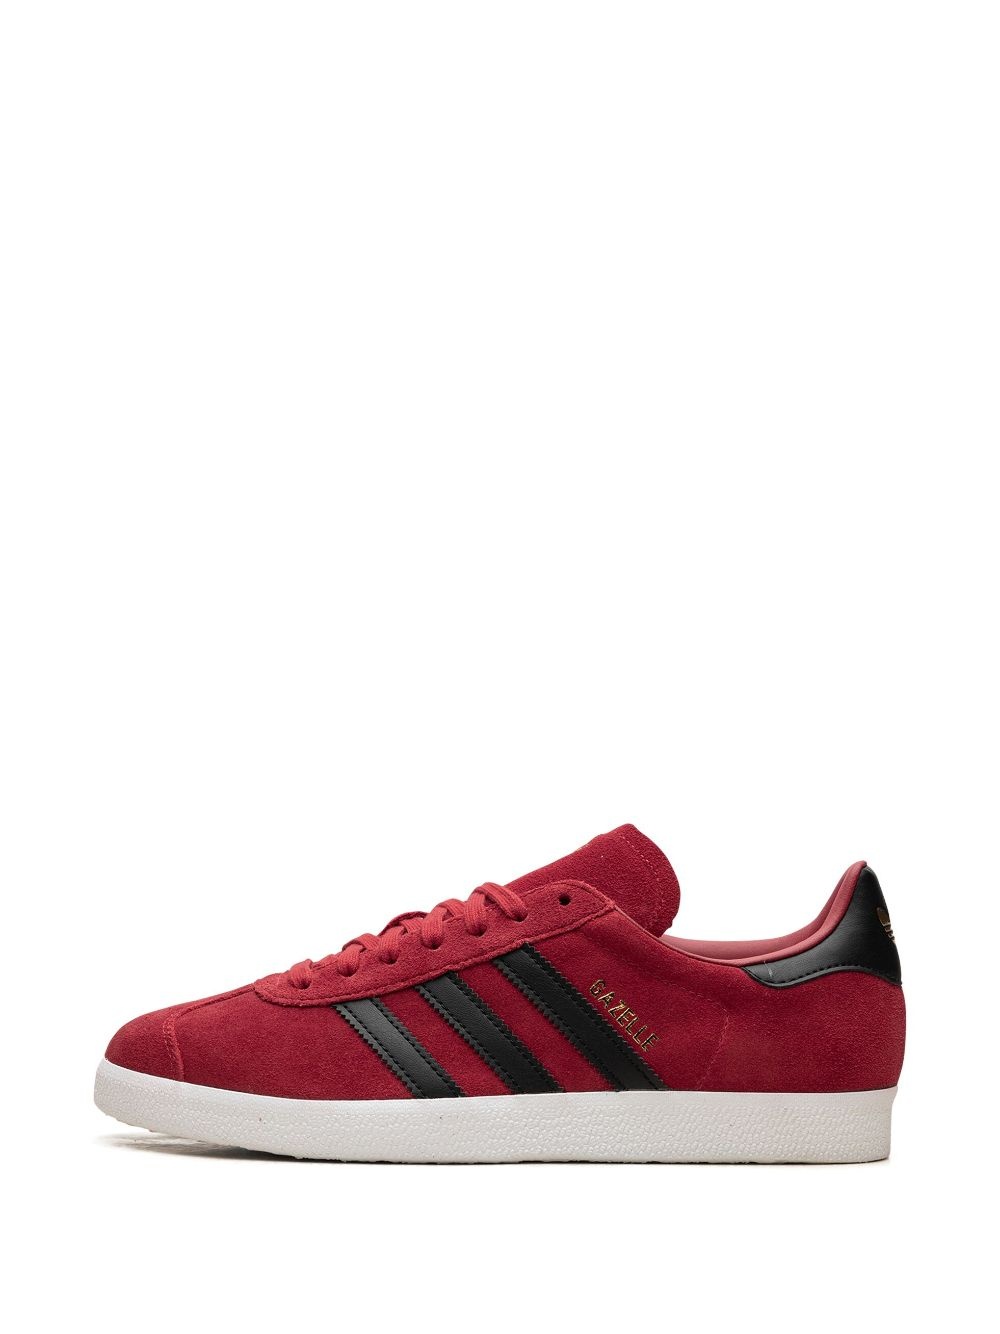 Gazelle "Manchester United" sneakers - 5